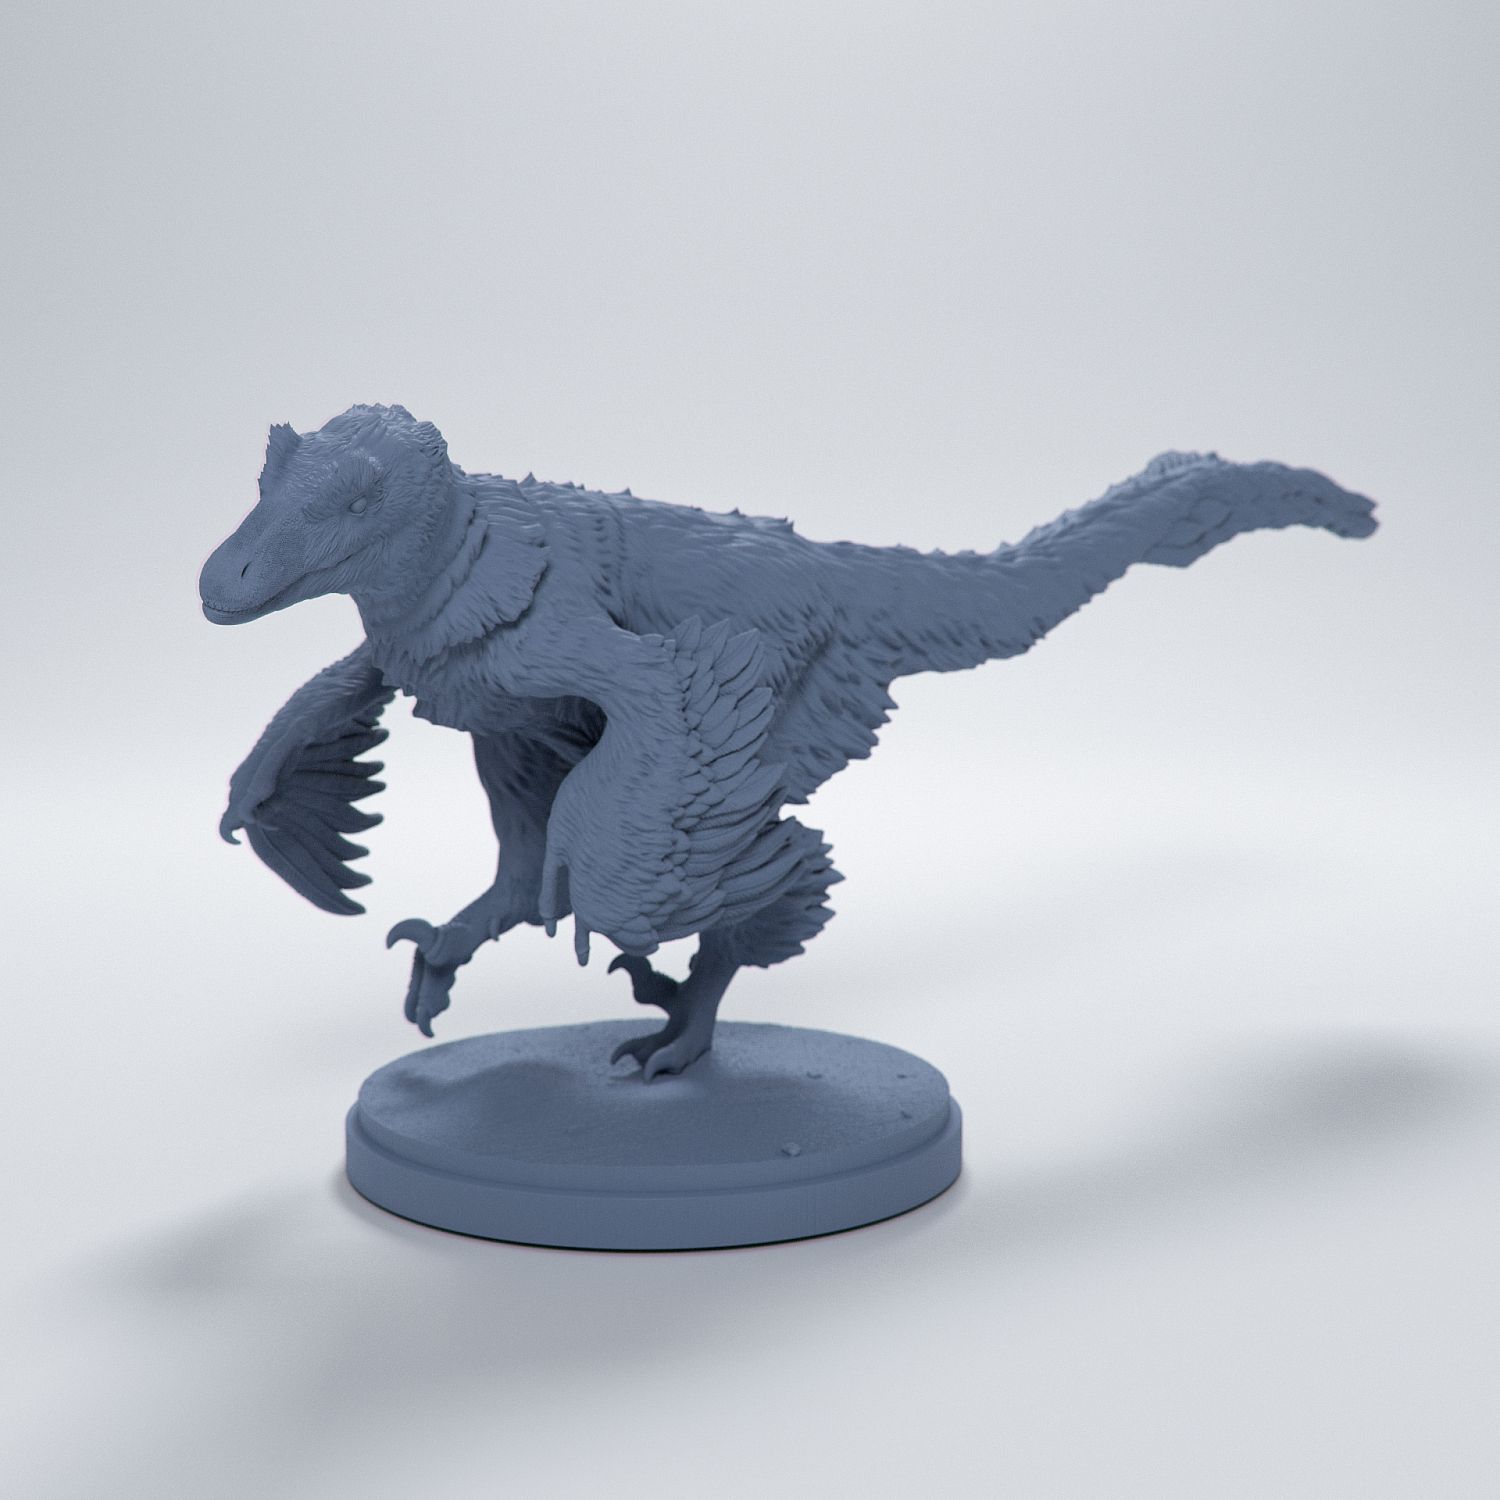 3D Printable Tarbosaurus running 1-35 scale pre-supported dinosaur by Dino  and Dog